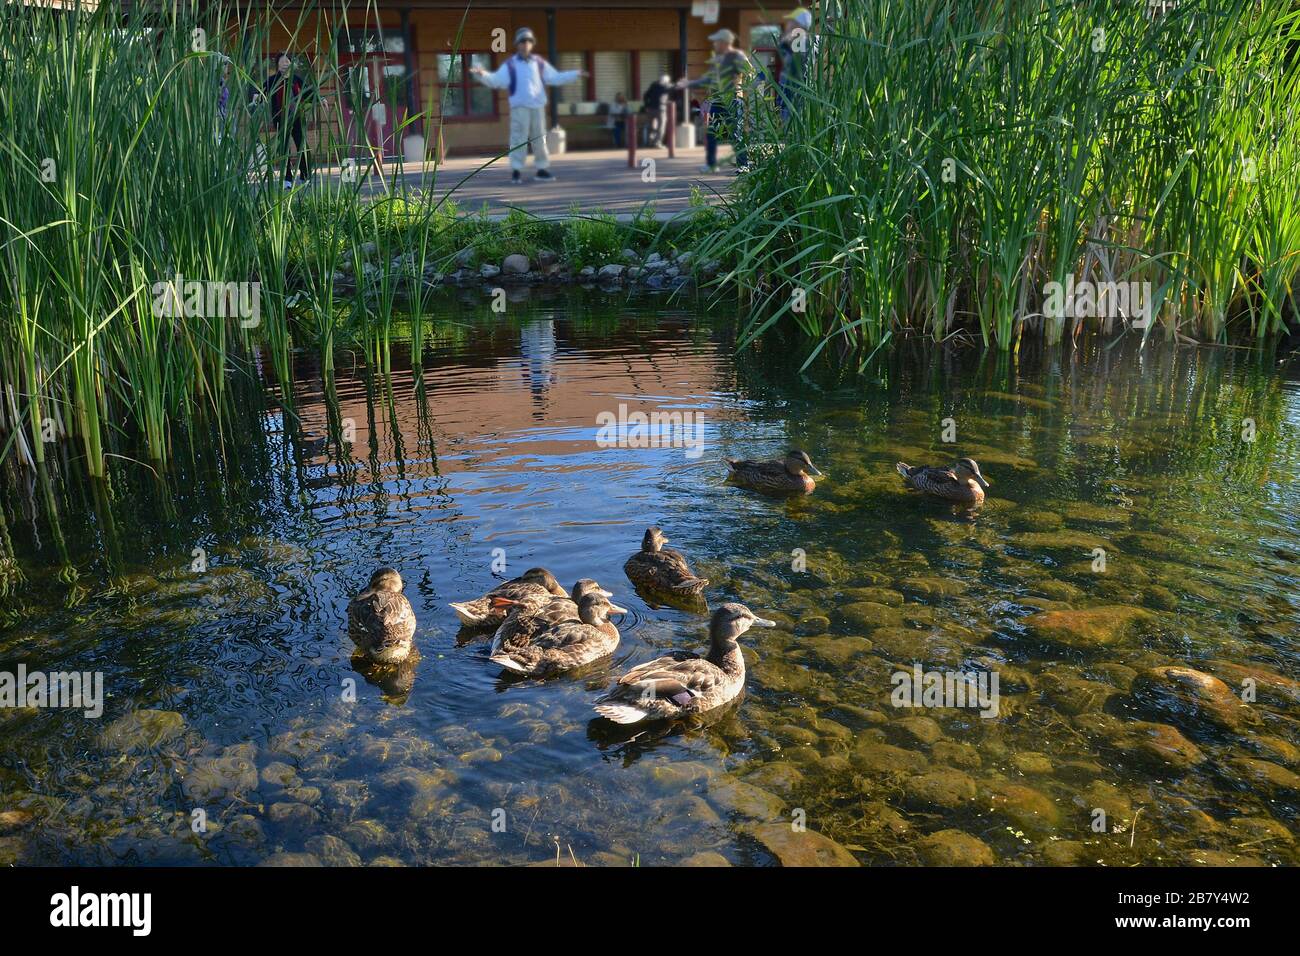 wildlife ducks and human in the same environment Stock Photo